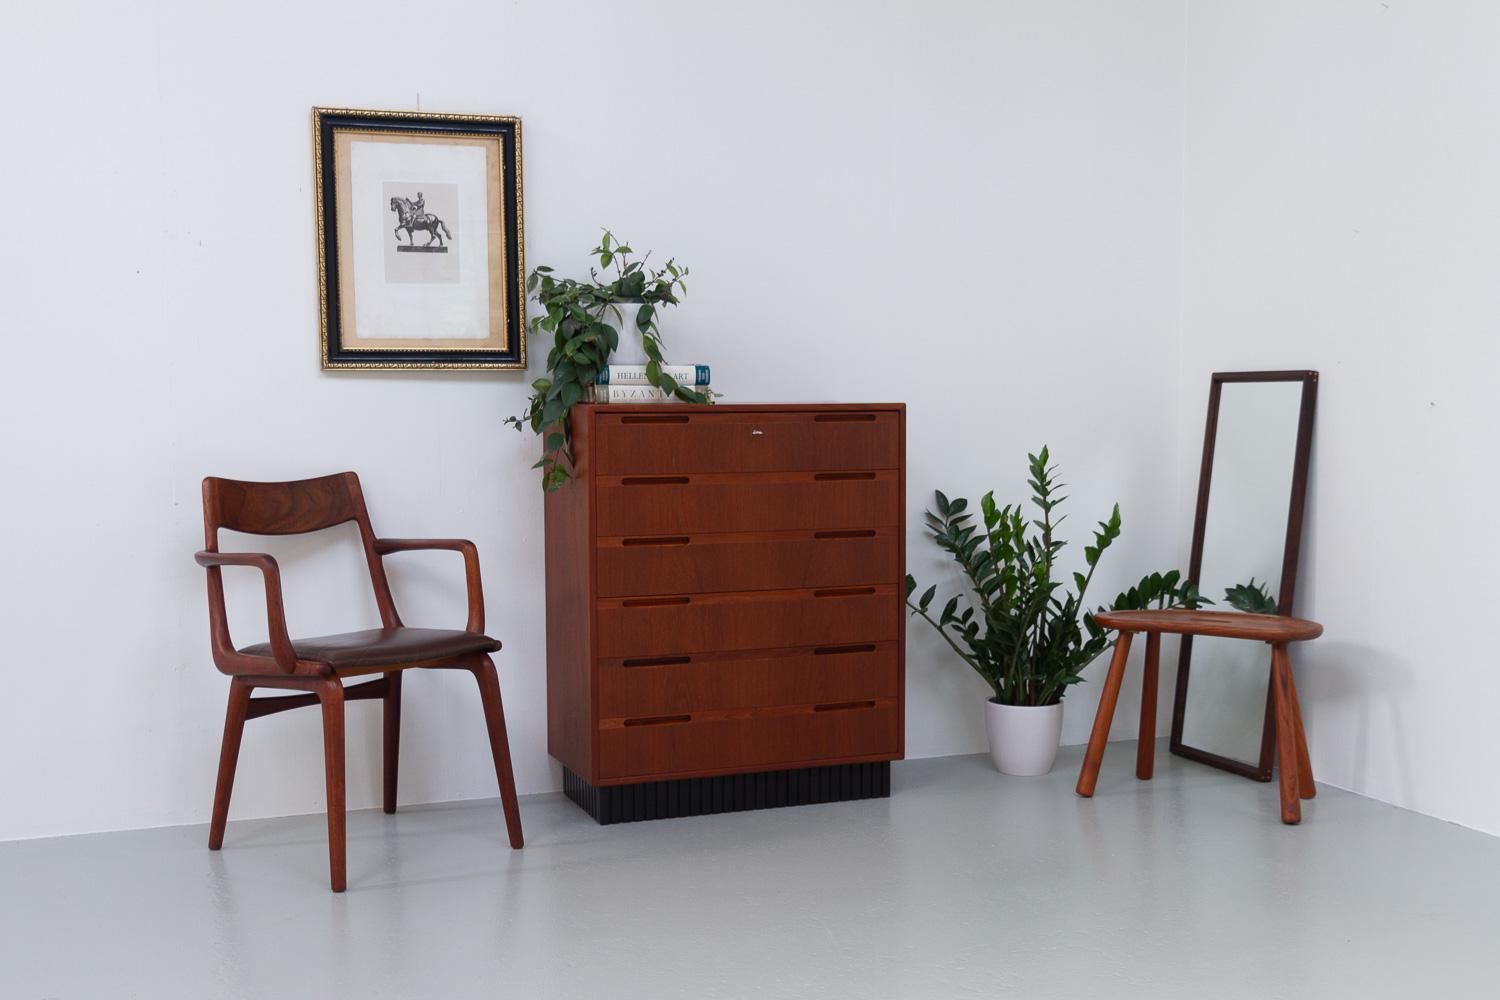 Vintage Danish Model 370 Boomerang Teak Armchair by Alfred Christensen for Slagelse Møbelværk, Denmark 1960s
Danish Mid-Century Modern sculptural armchair with organic curved lines in solid teak. Very elegant and iconic chair that is a great